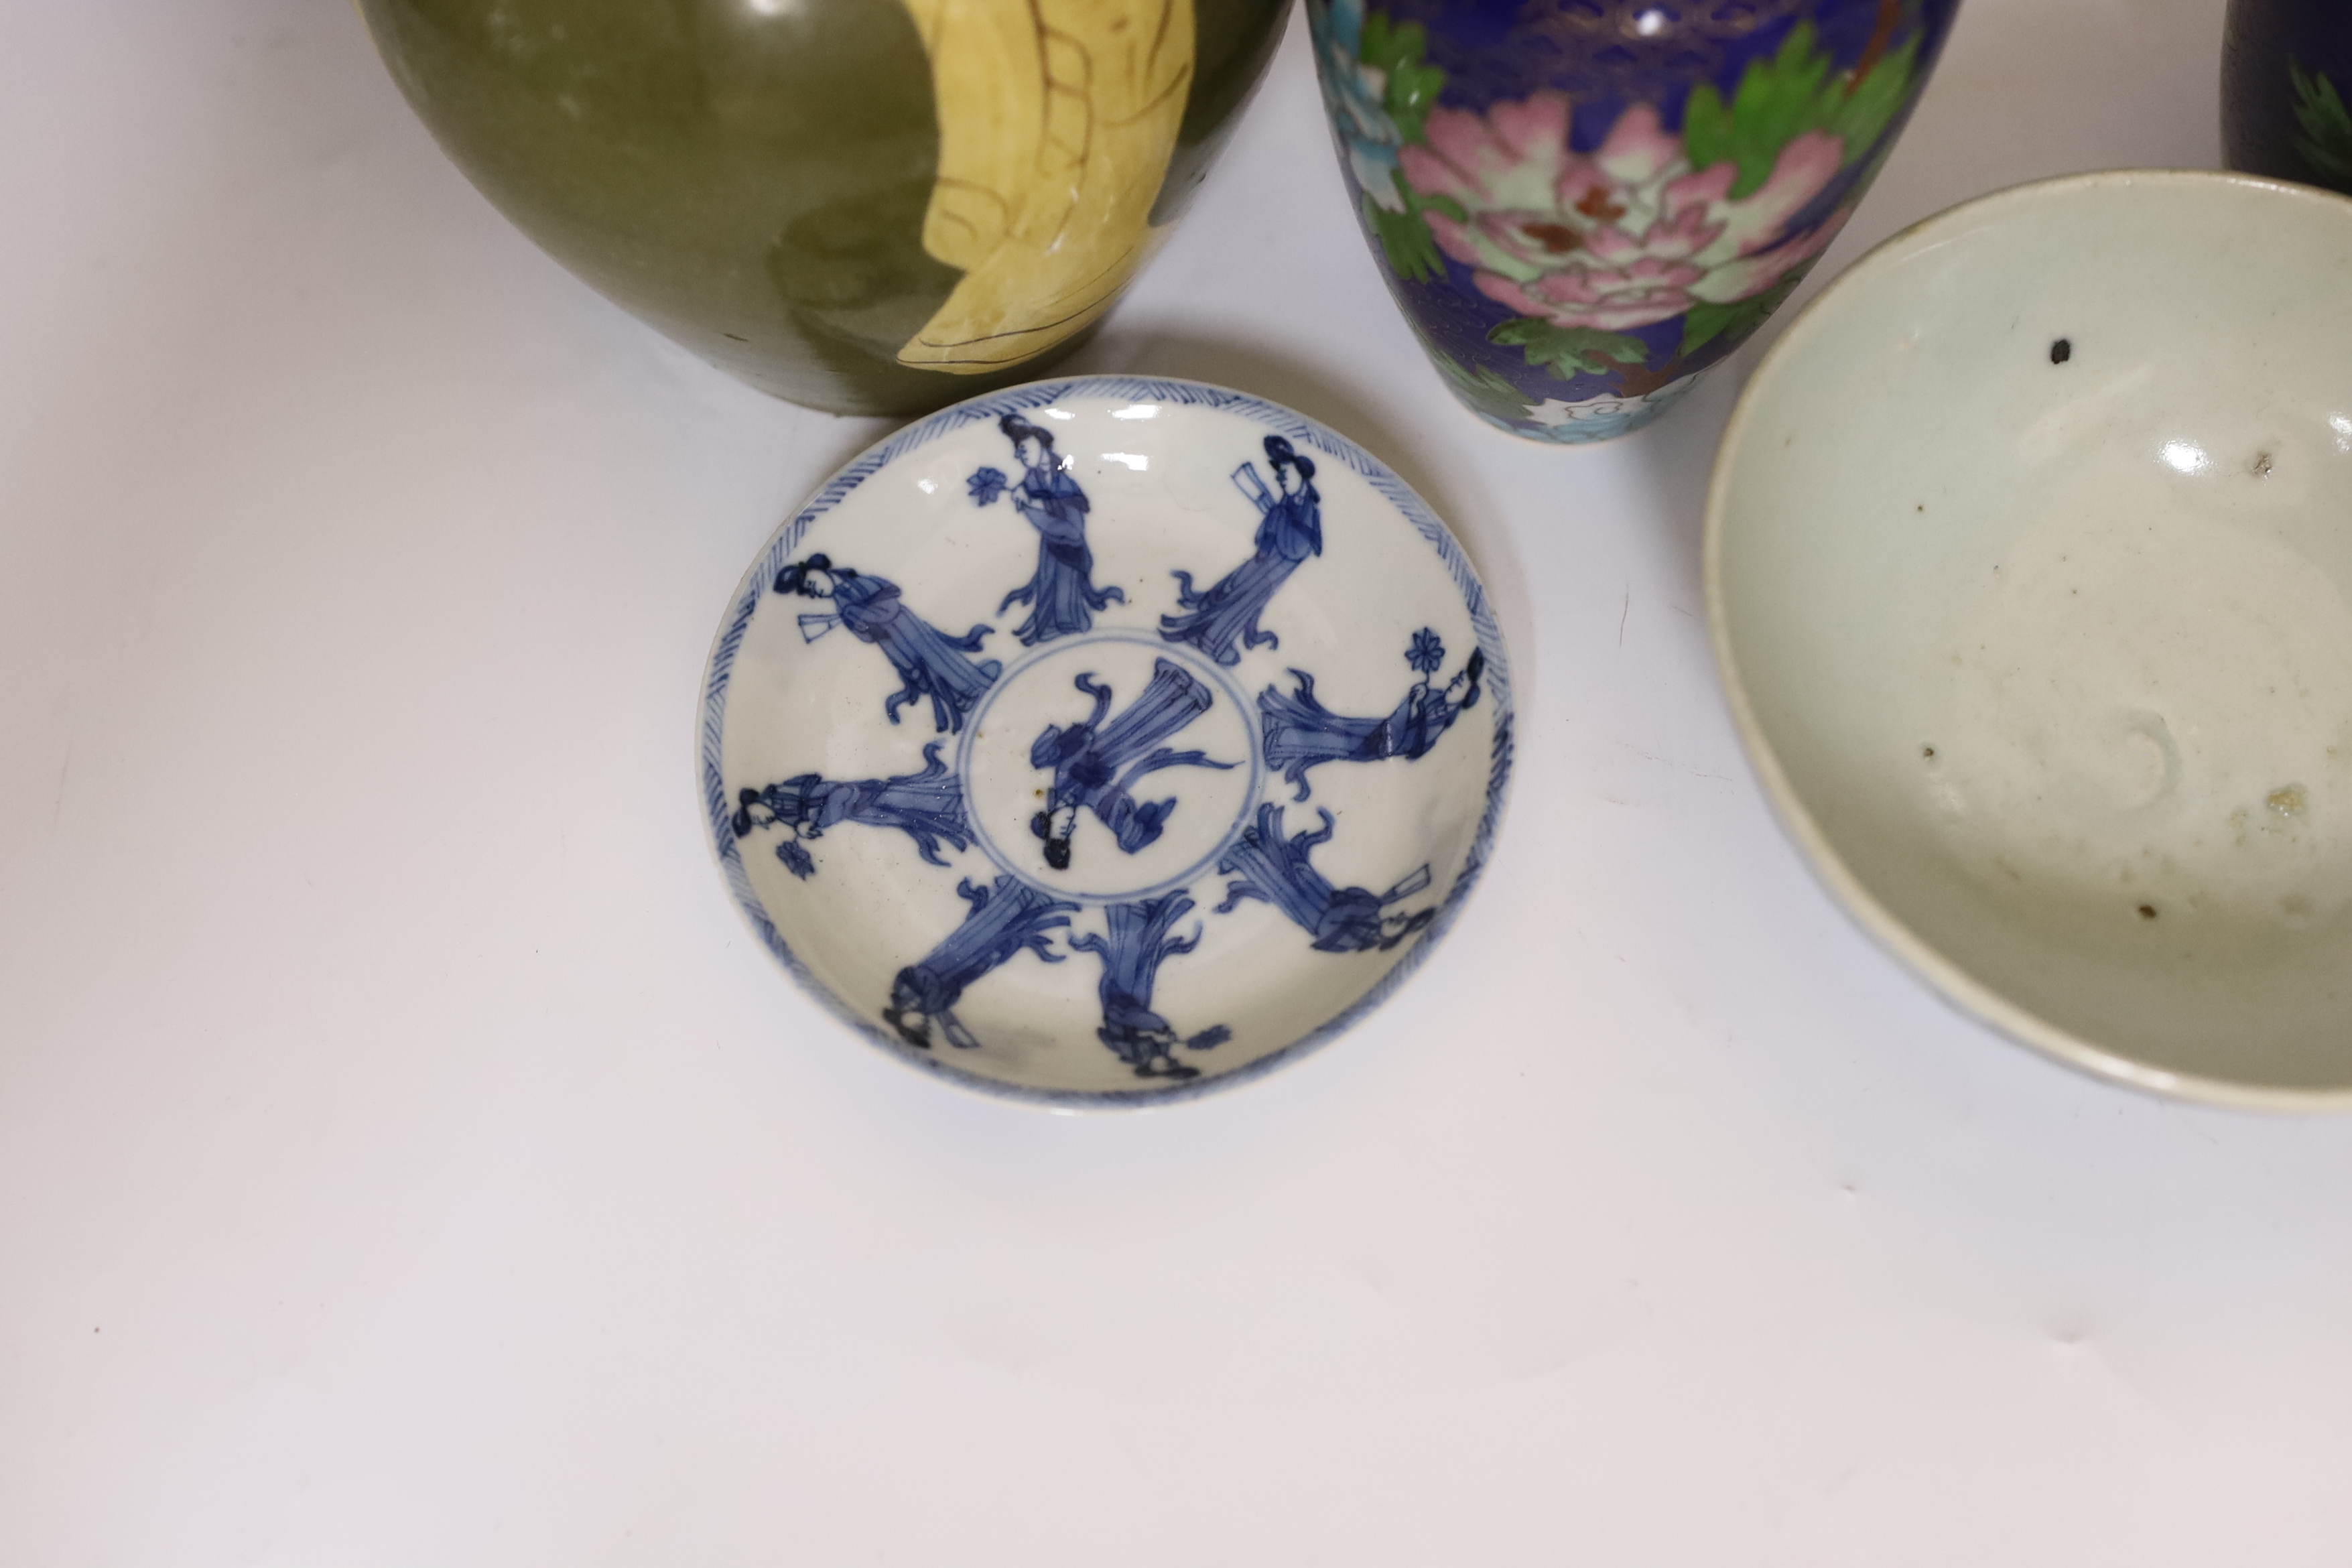 Mixed Chinese and Japanese ceramics including pair of cloisonné vases, a blue and white dish and a crackle glaze vase, largest 26cm high